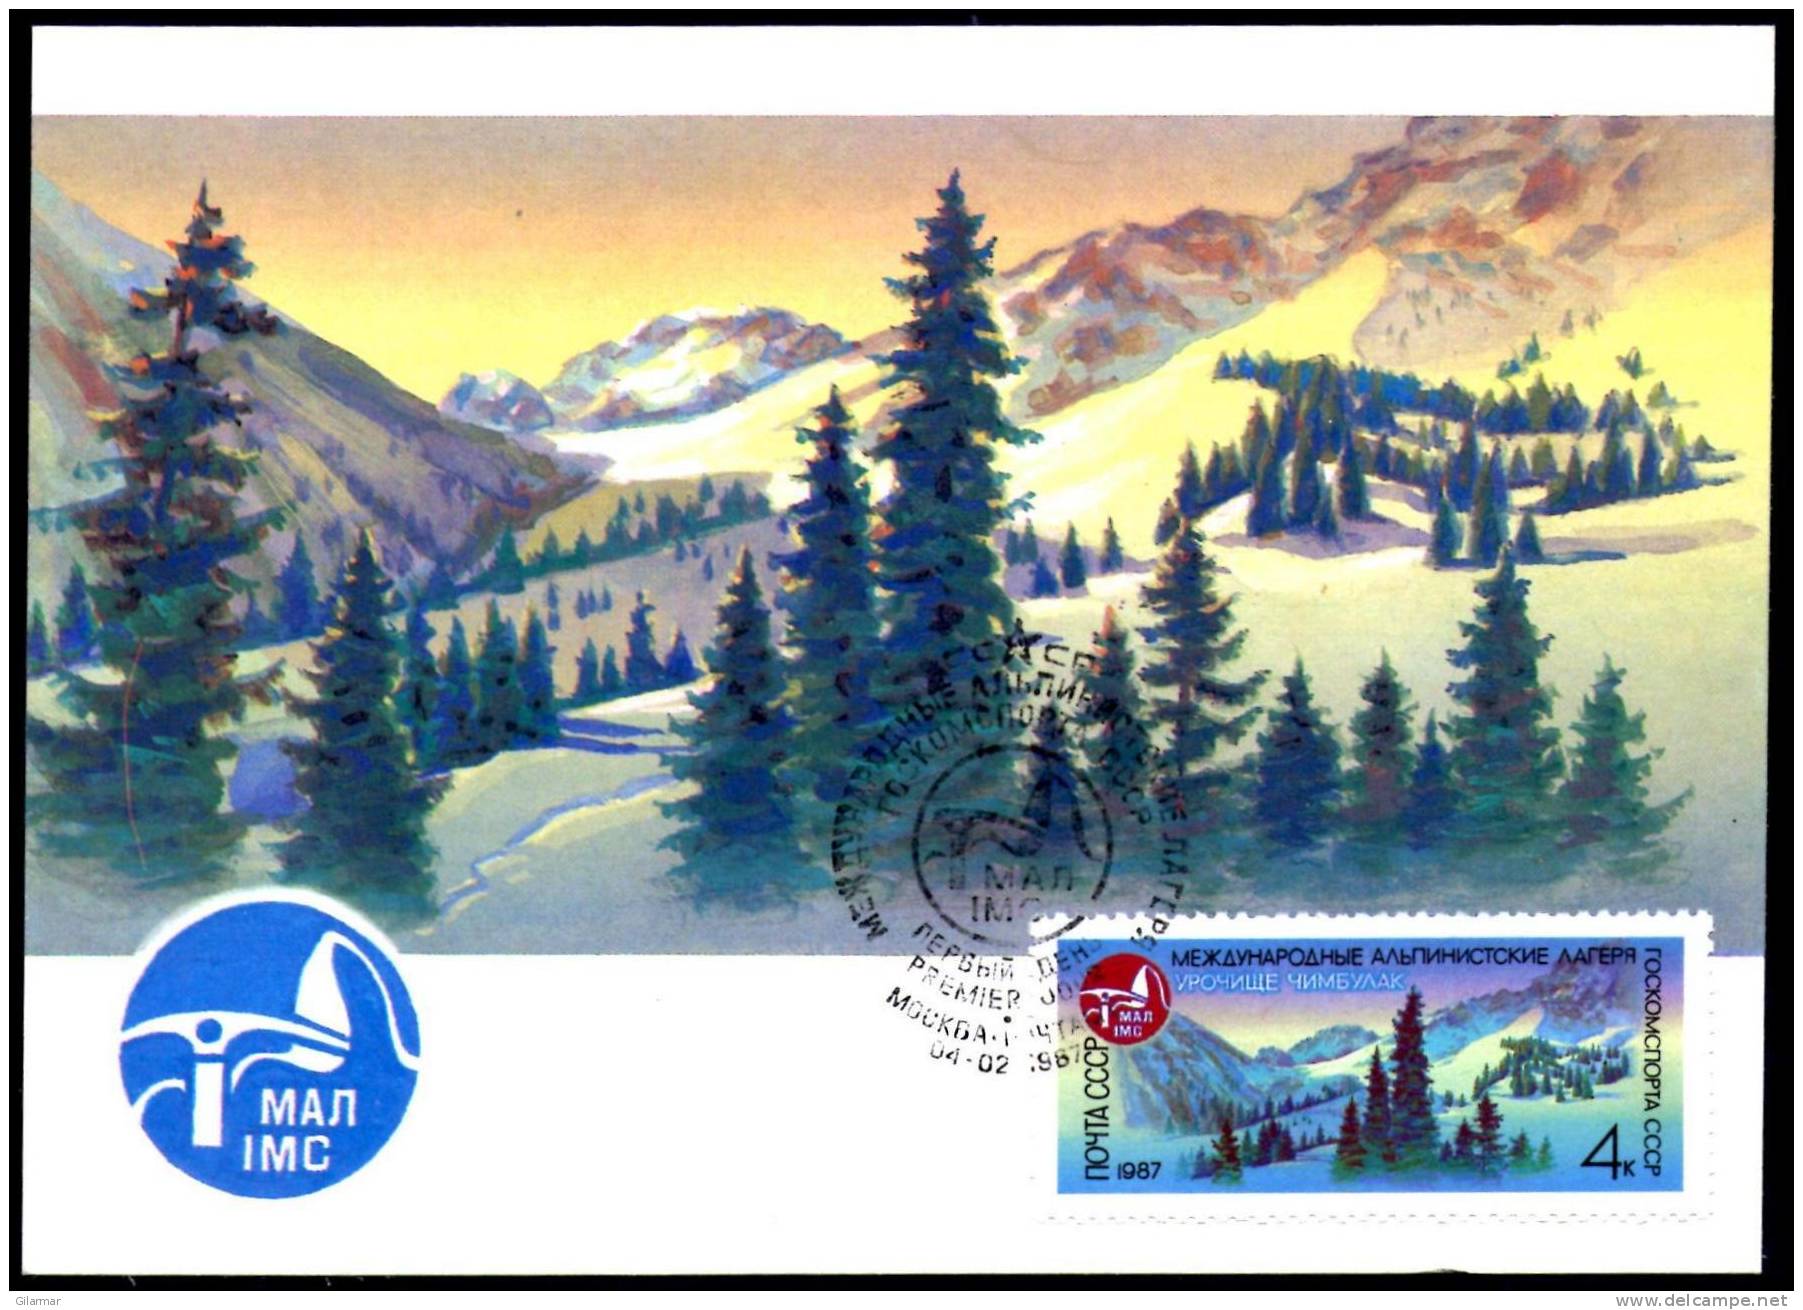 MOUNTAINEERING - SOVIET UNION MOSCOW 1987 - CHIMBULAK GORGE - Mi. 5685 / Sc. 5532 - SPECIAL CARD WITH FIRST DAY CANCEL - Escalada